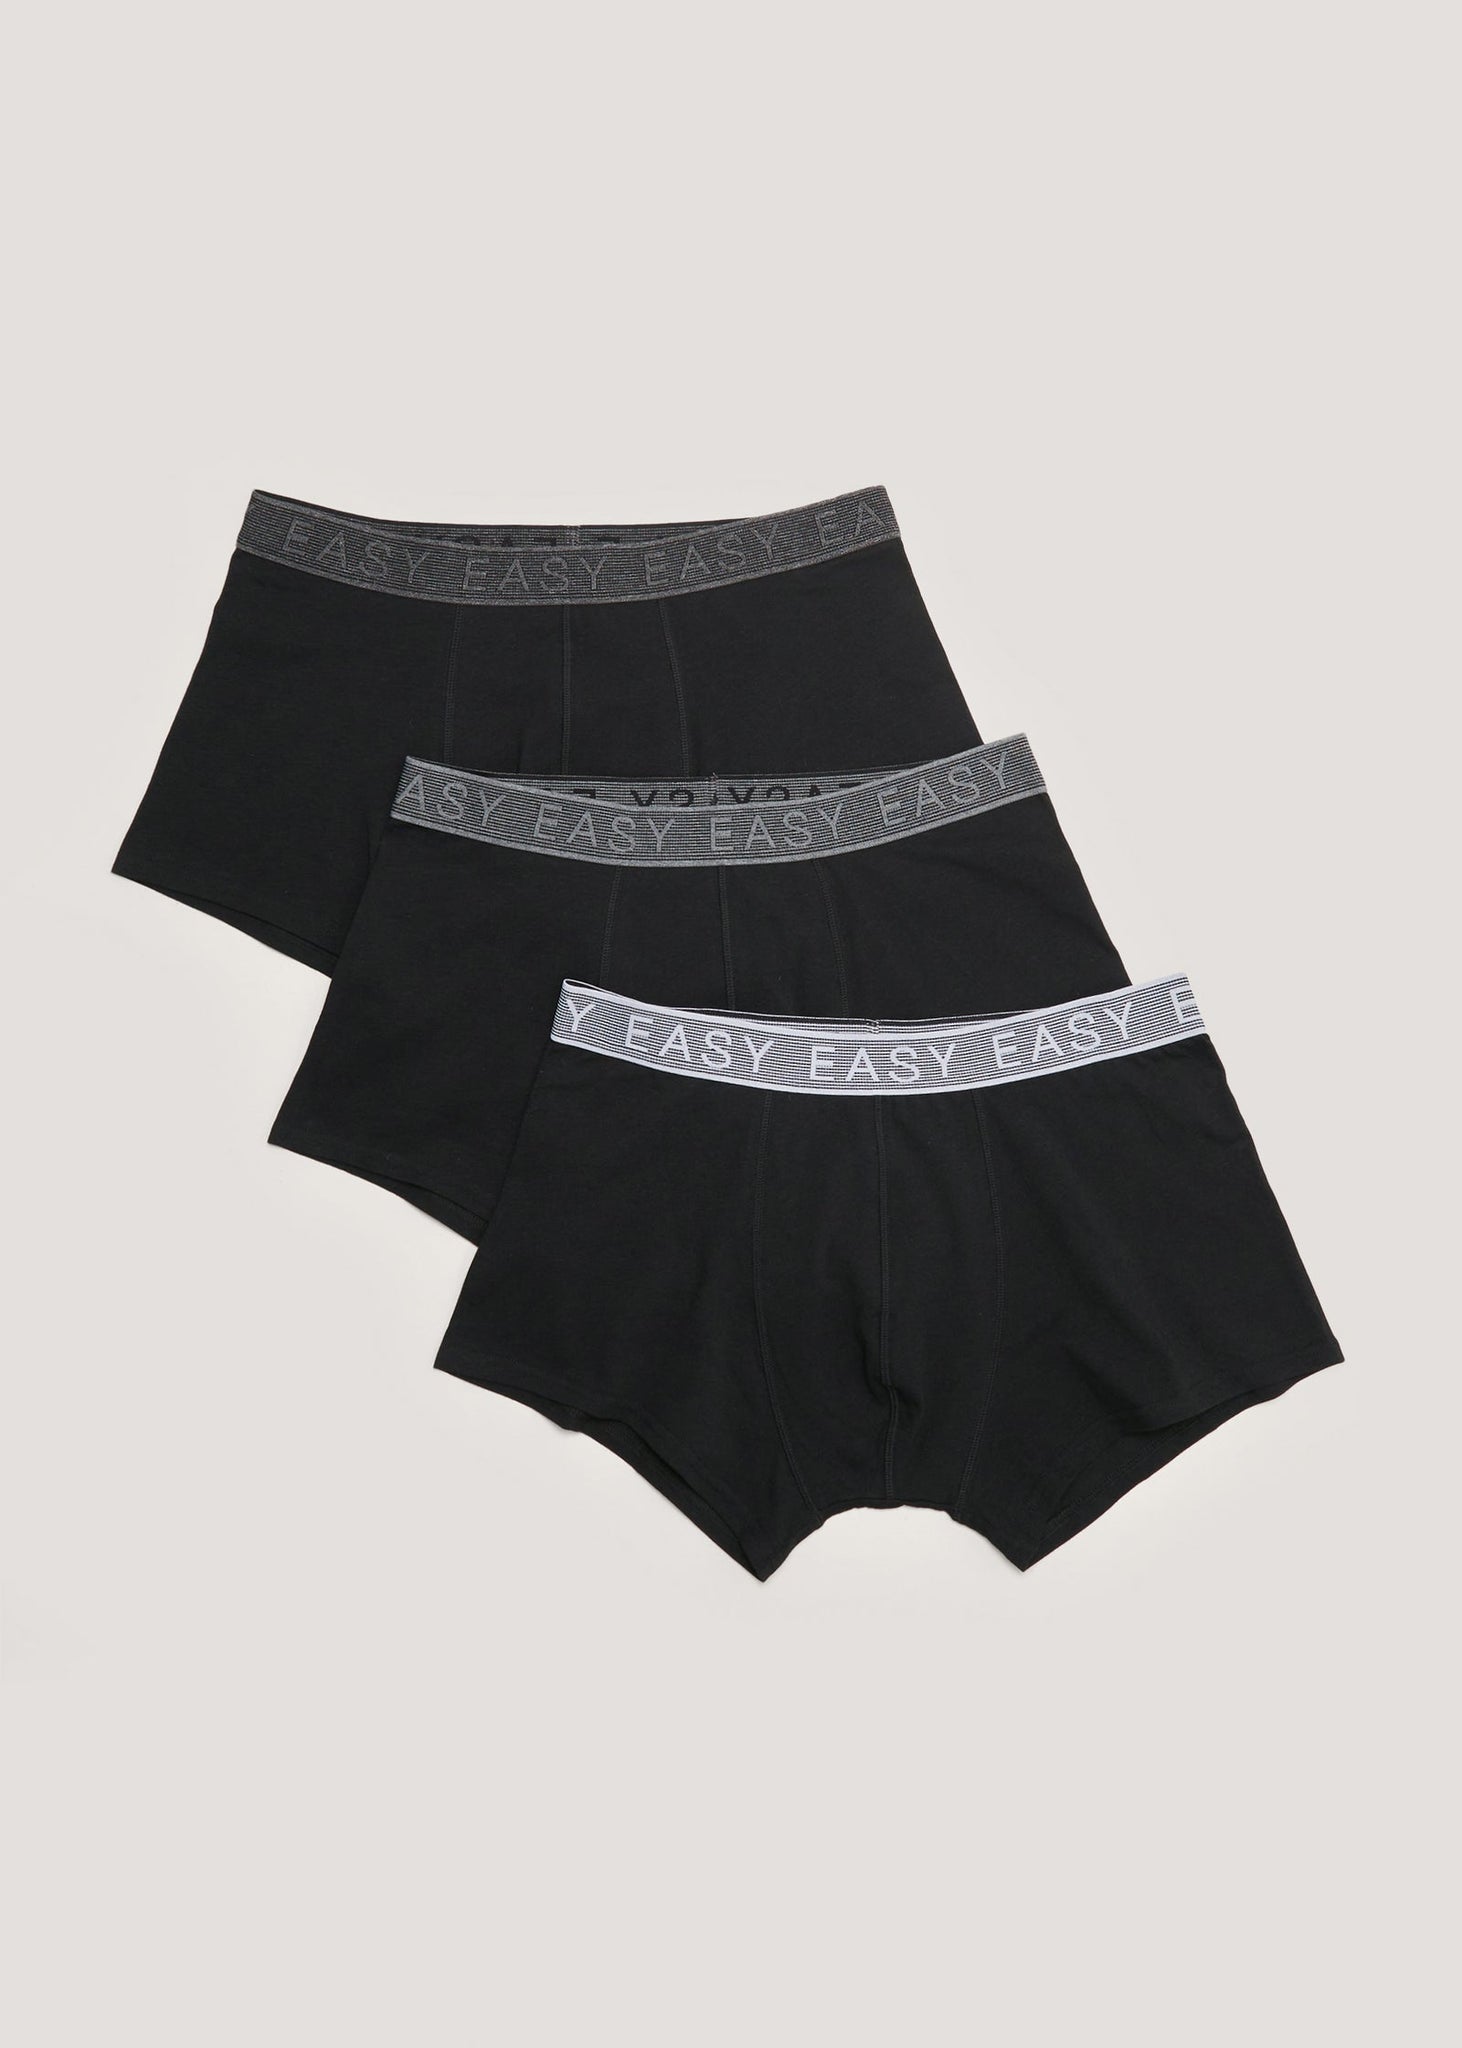 3 Pack Black Hipster Boxers  M212048